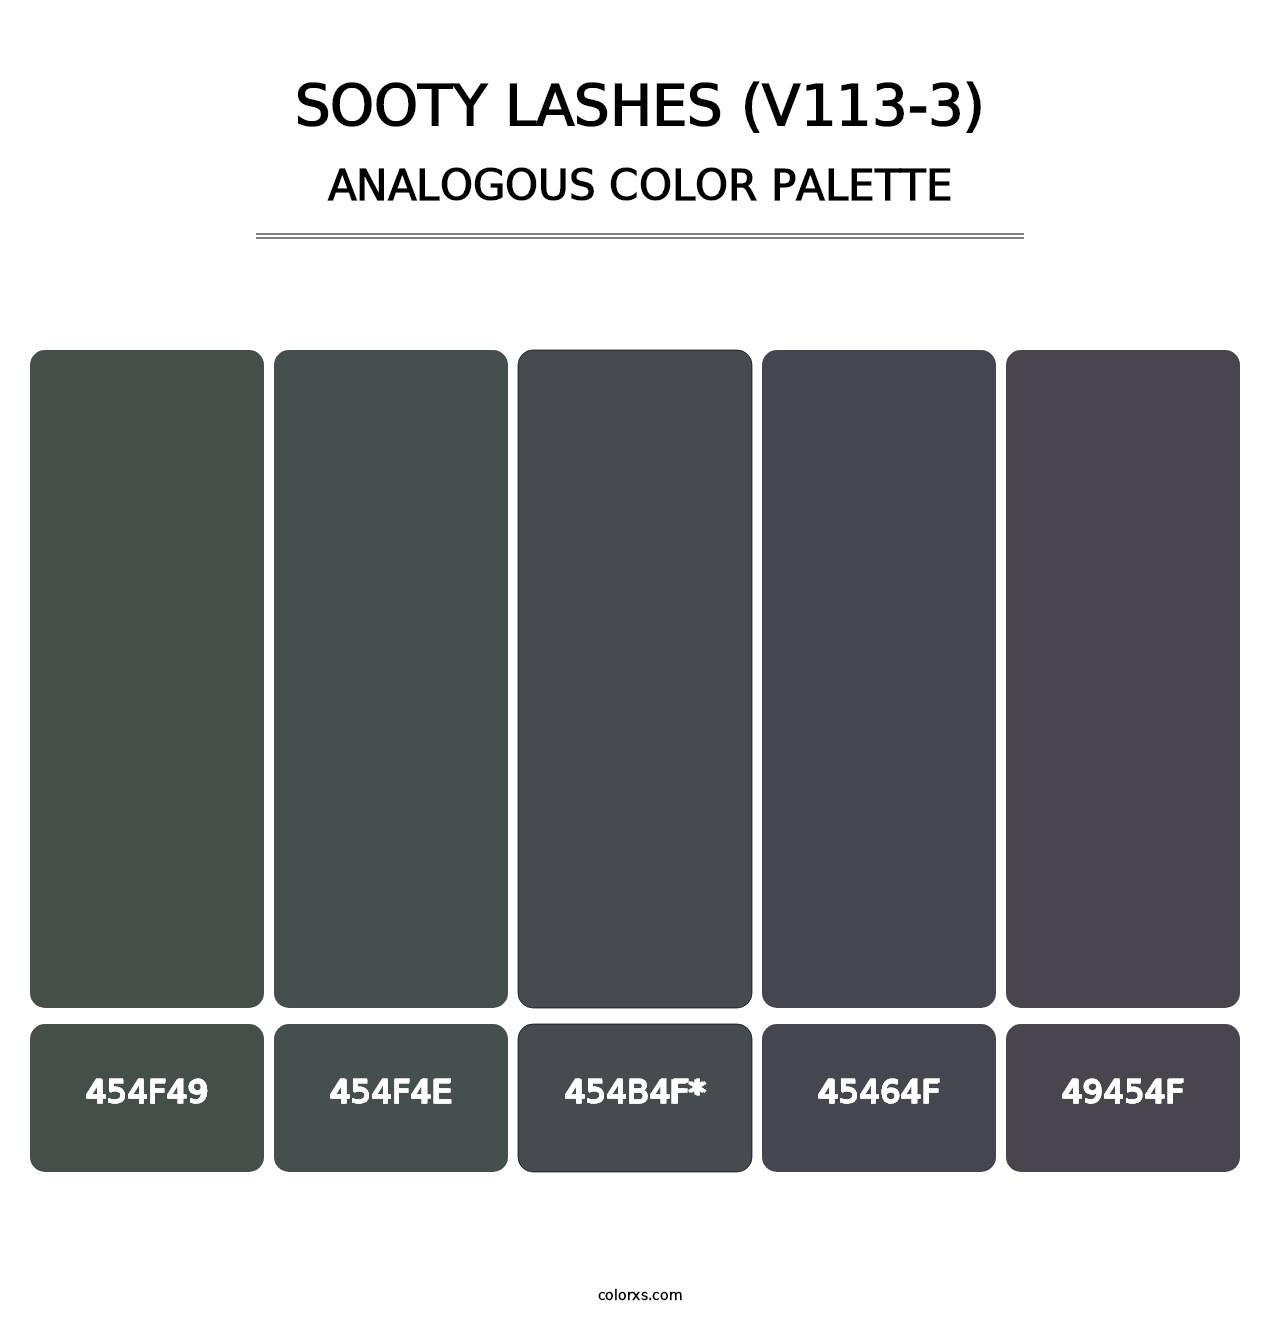 Sooty Lashes (V113-3) - Analogous Color Palette